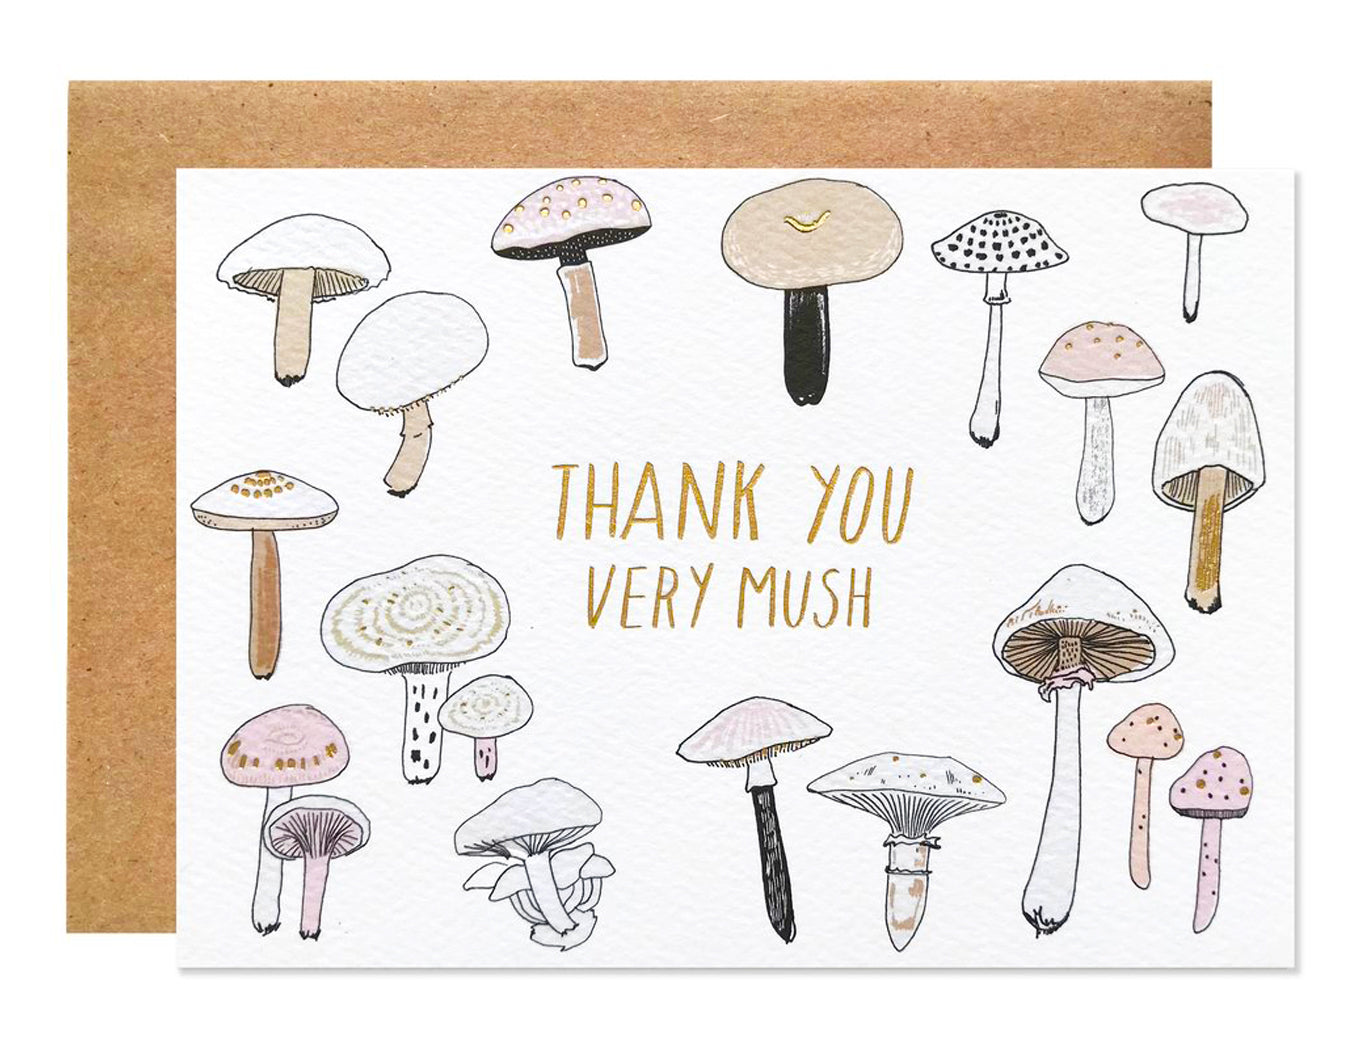 illustrated mushrooms surround text that reads thank you very mush in gold foil